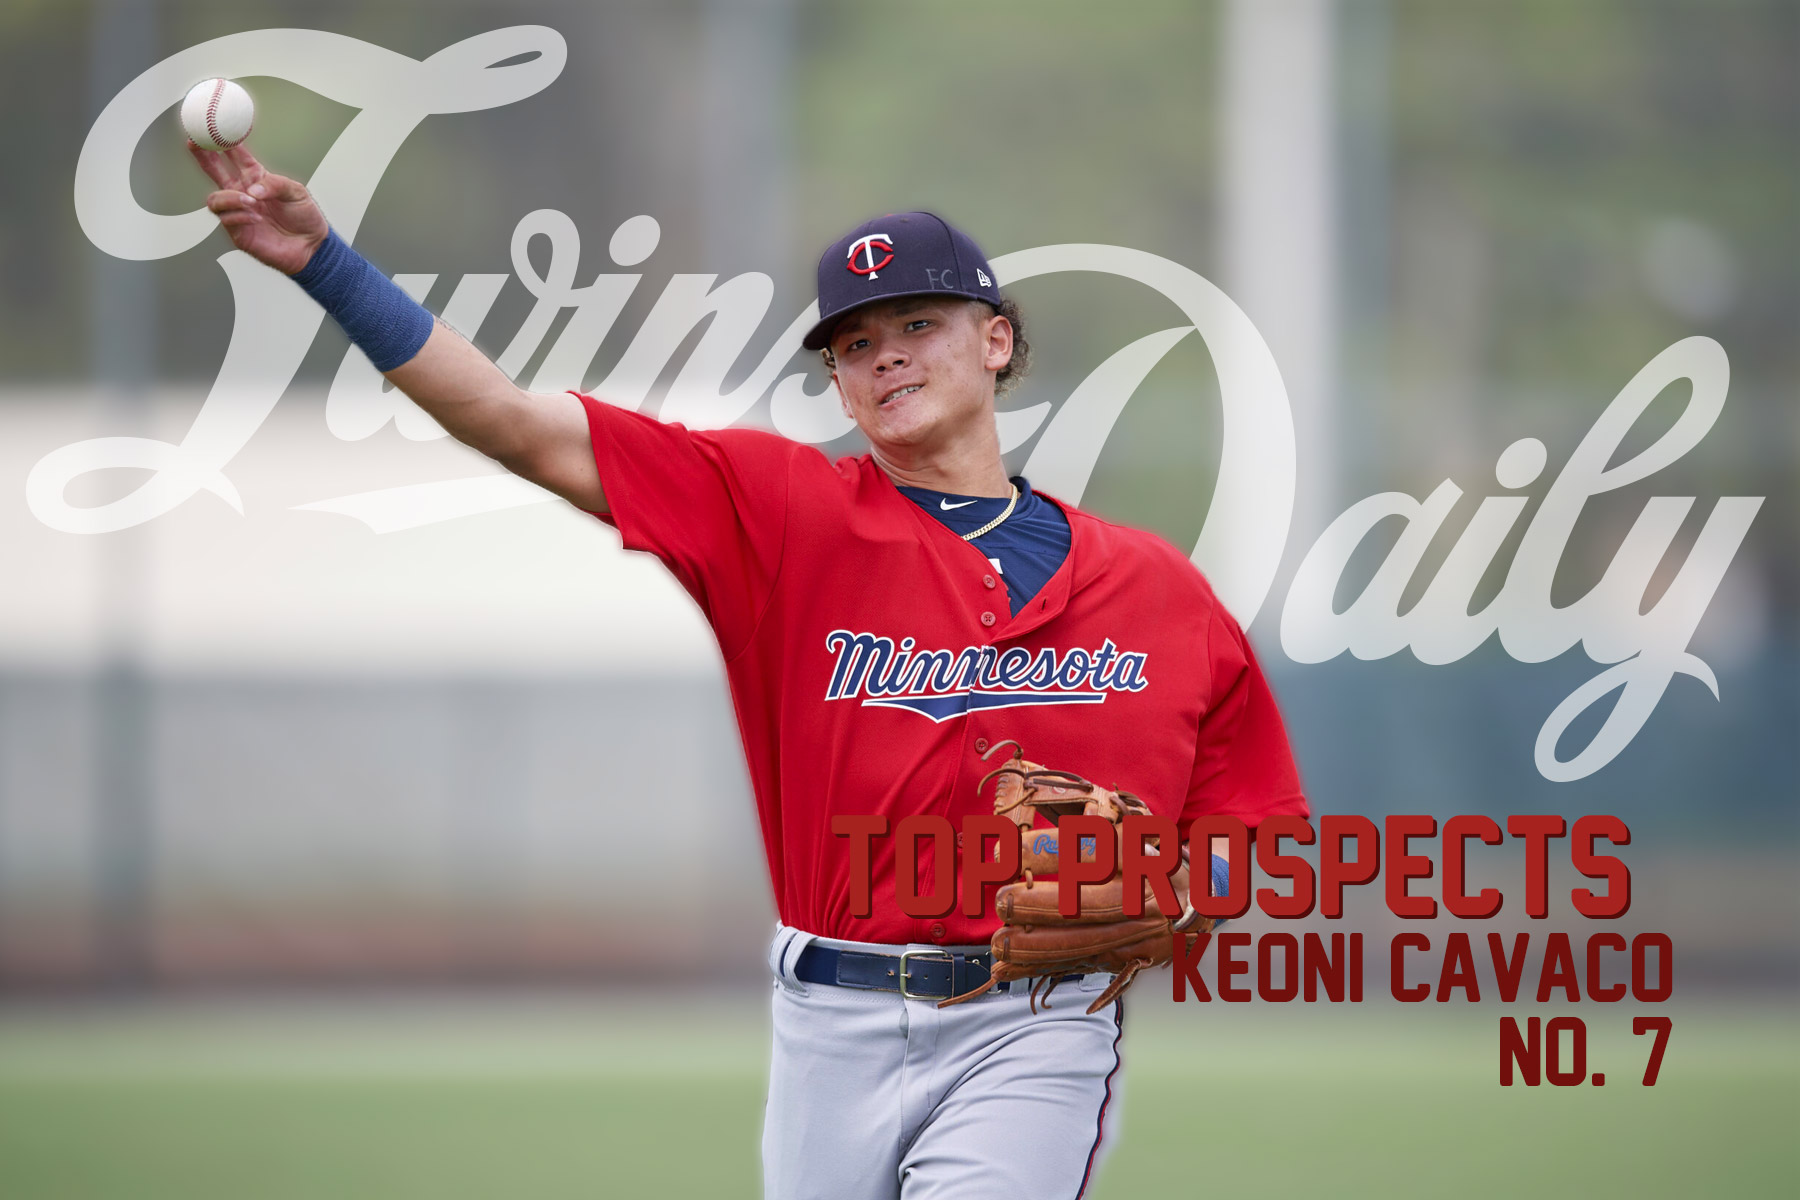 Twins Prospect Max Kepler Continues To Impress - Minor Leagues - Twins Daily